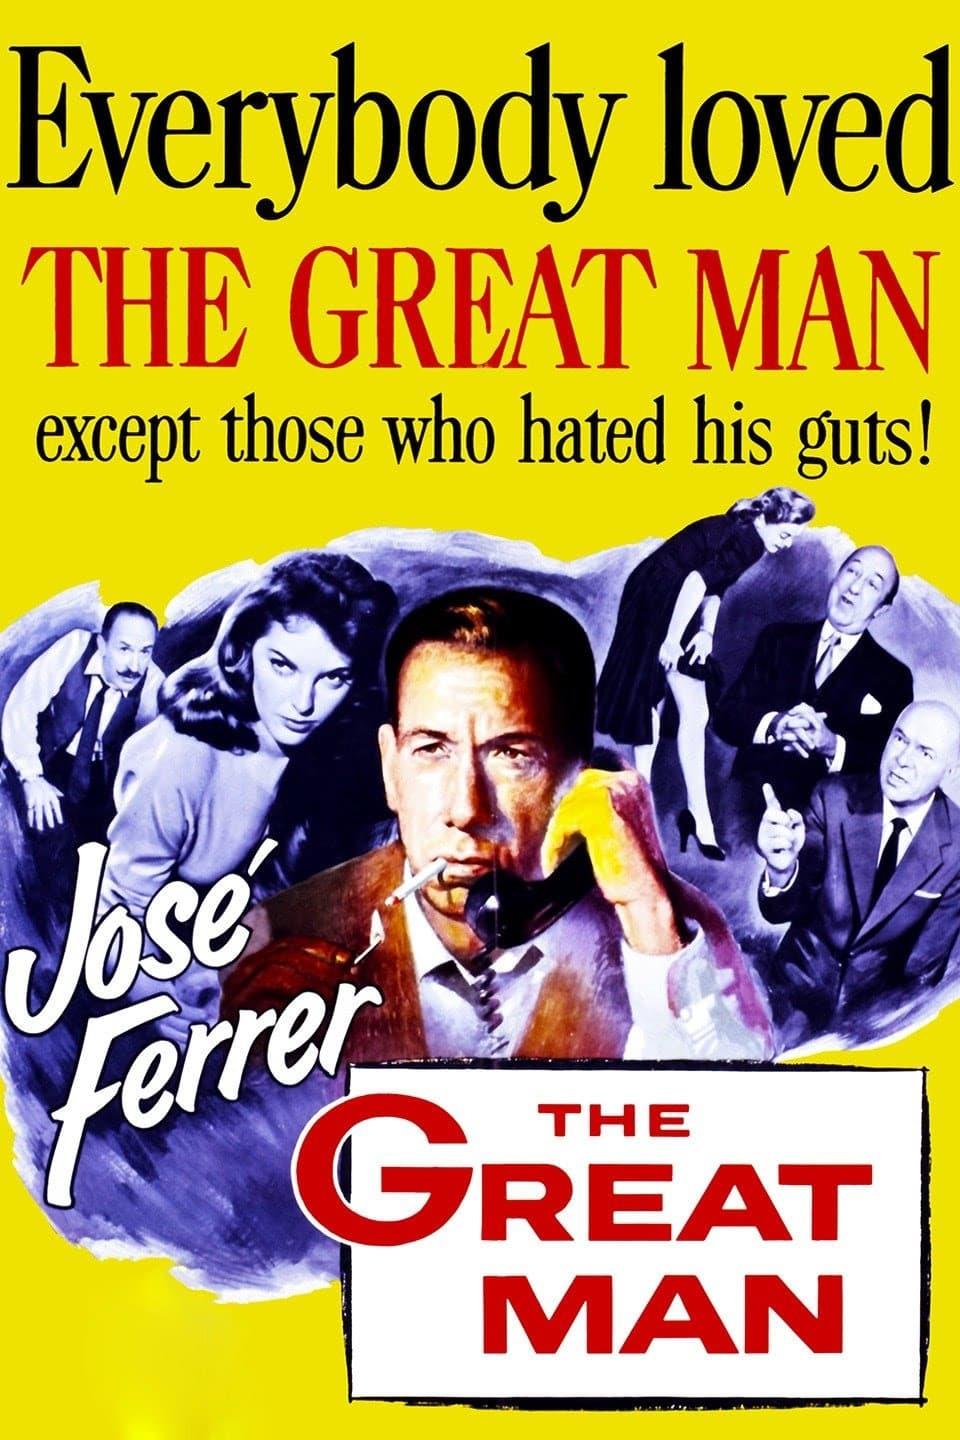 The Great Man poster